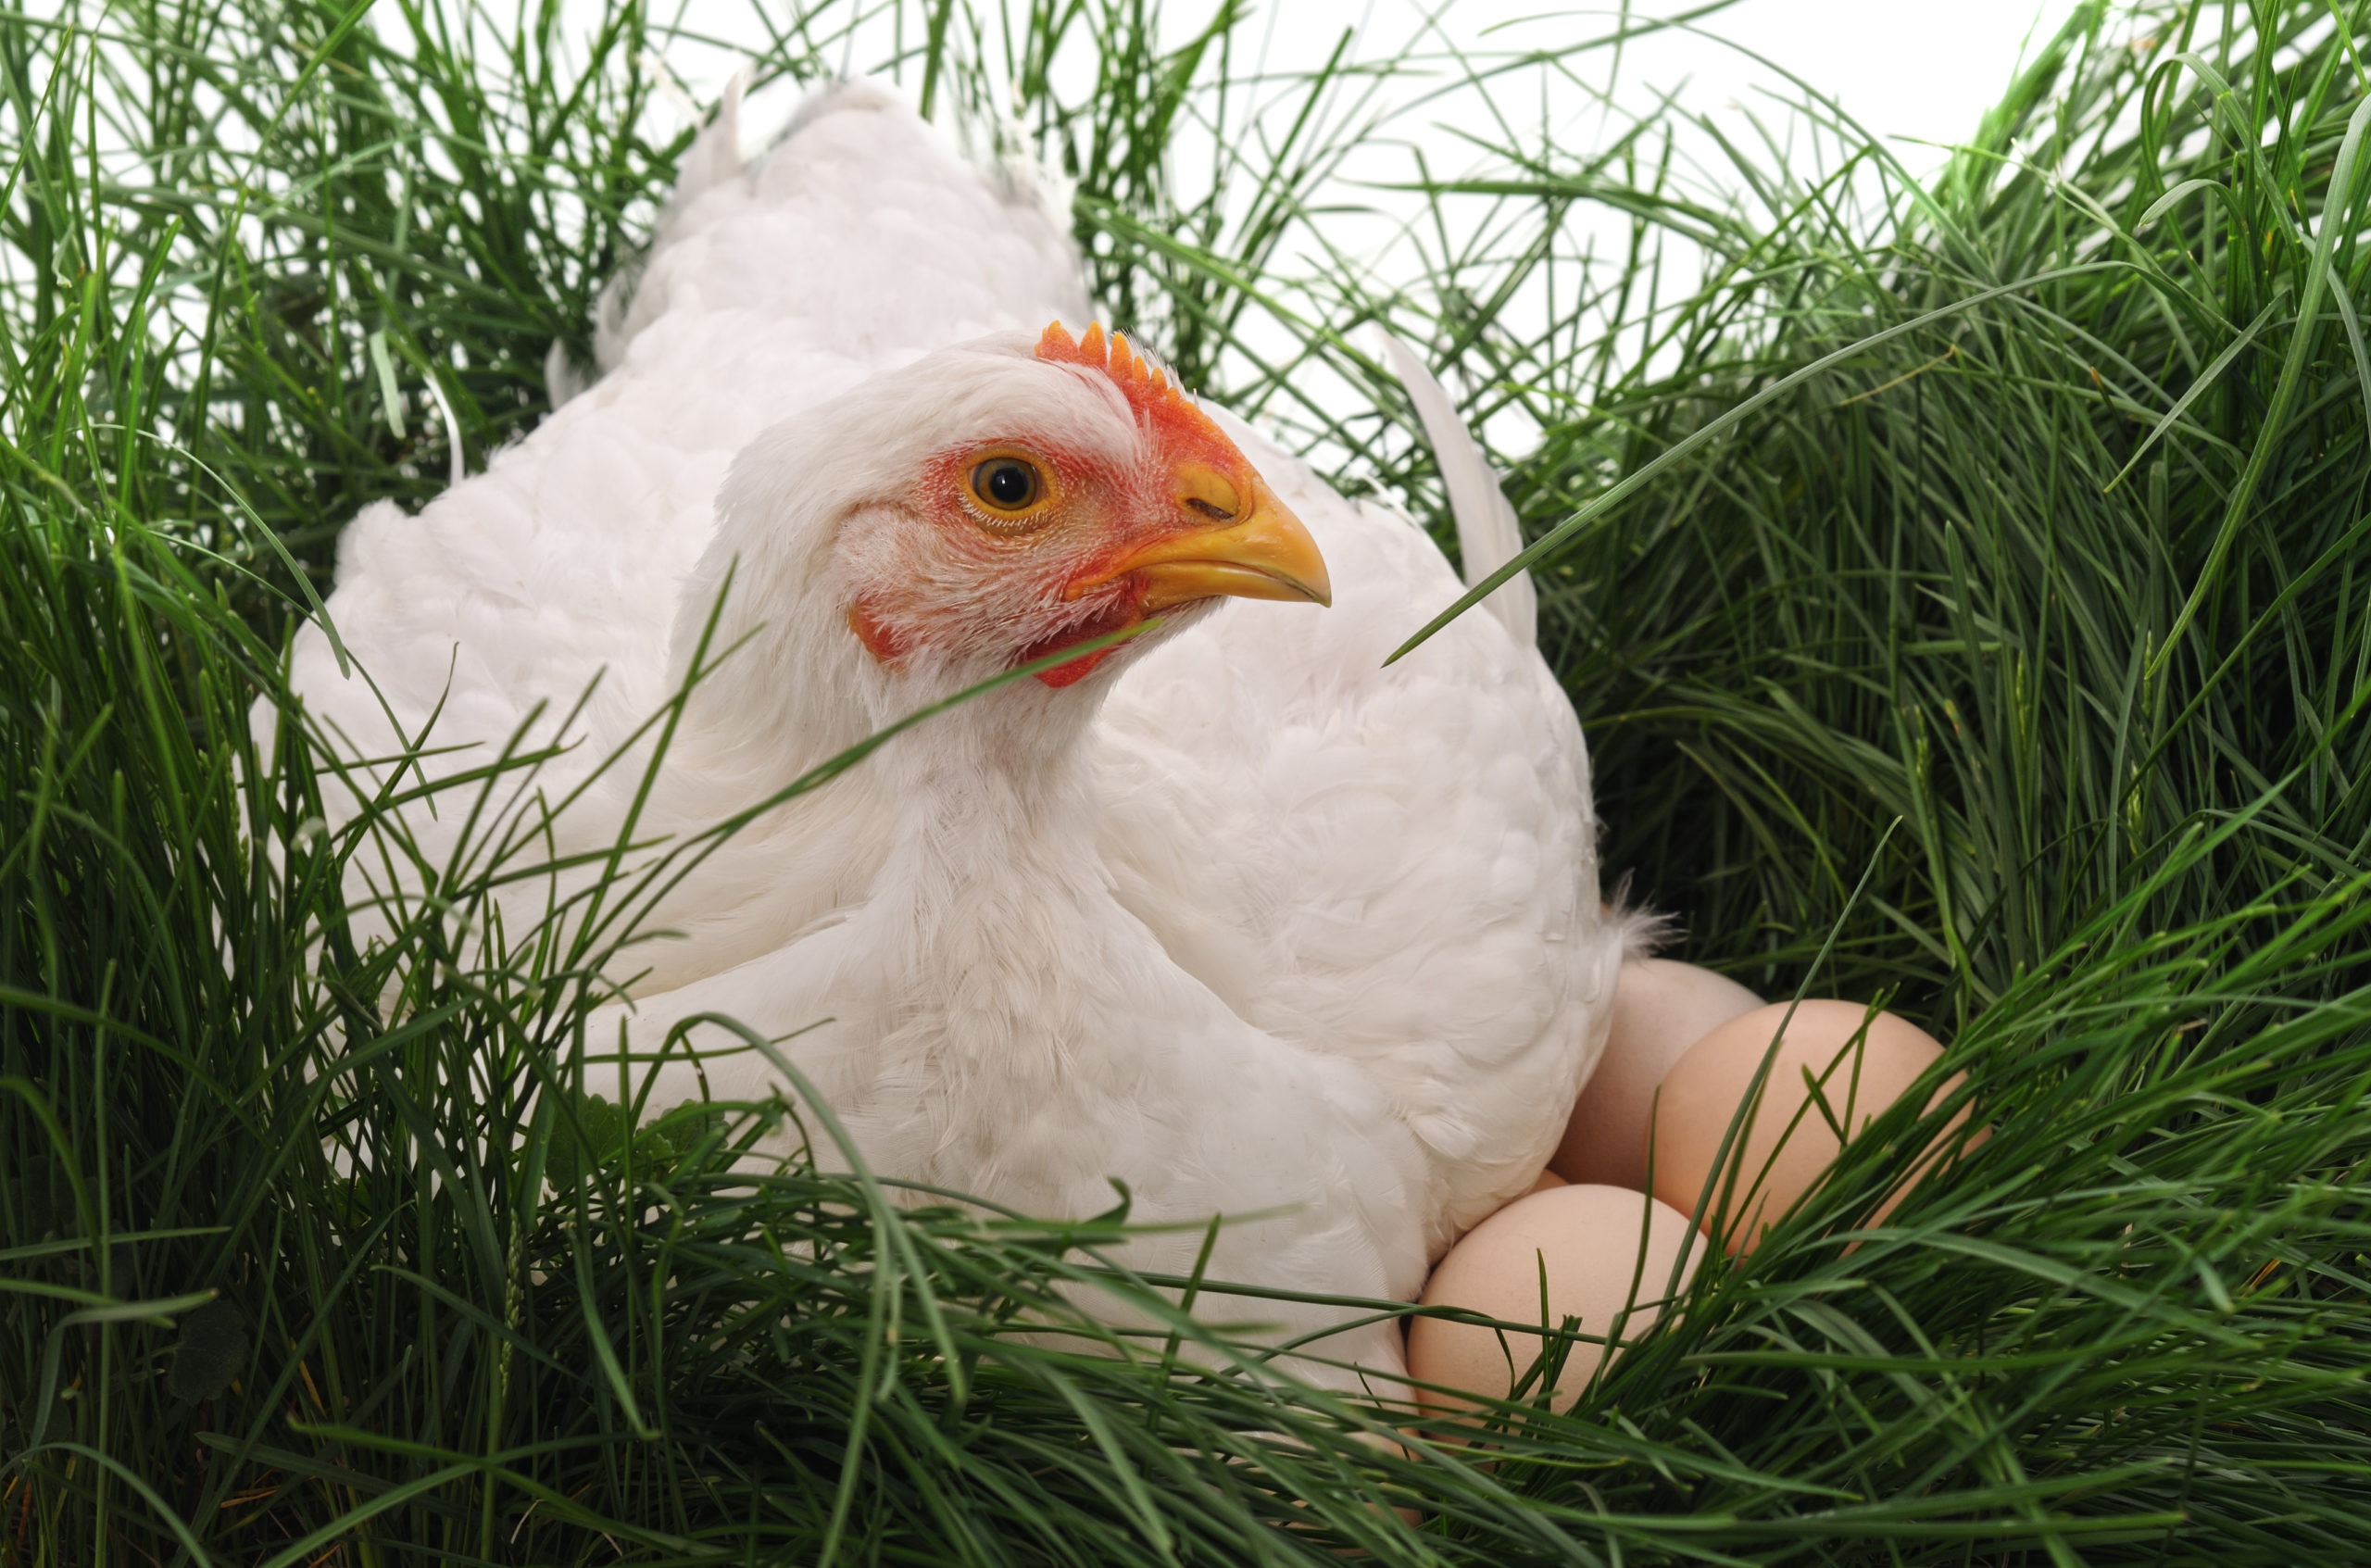 Chicken sitting on eggs in the grass